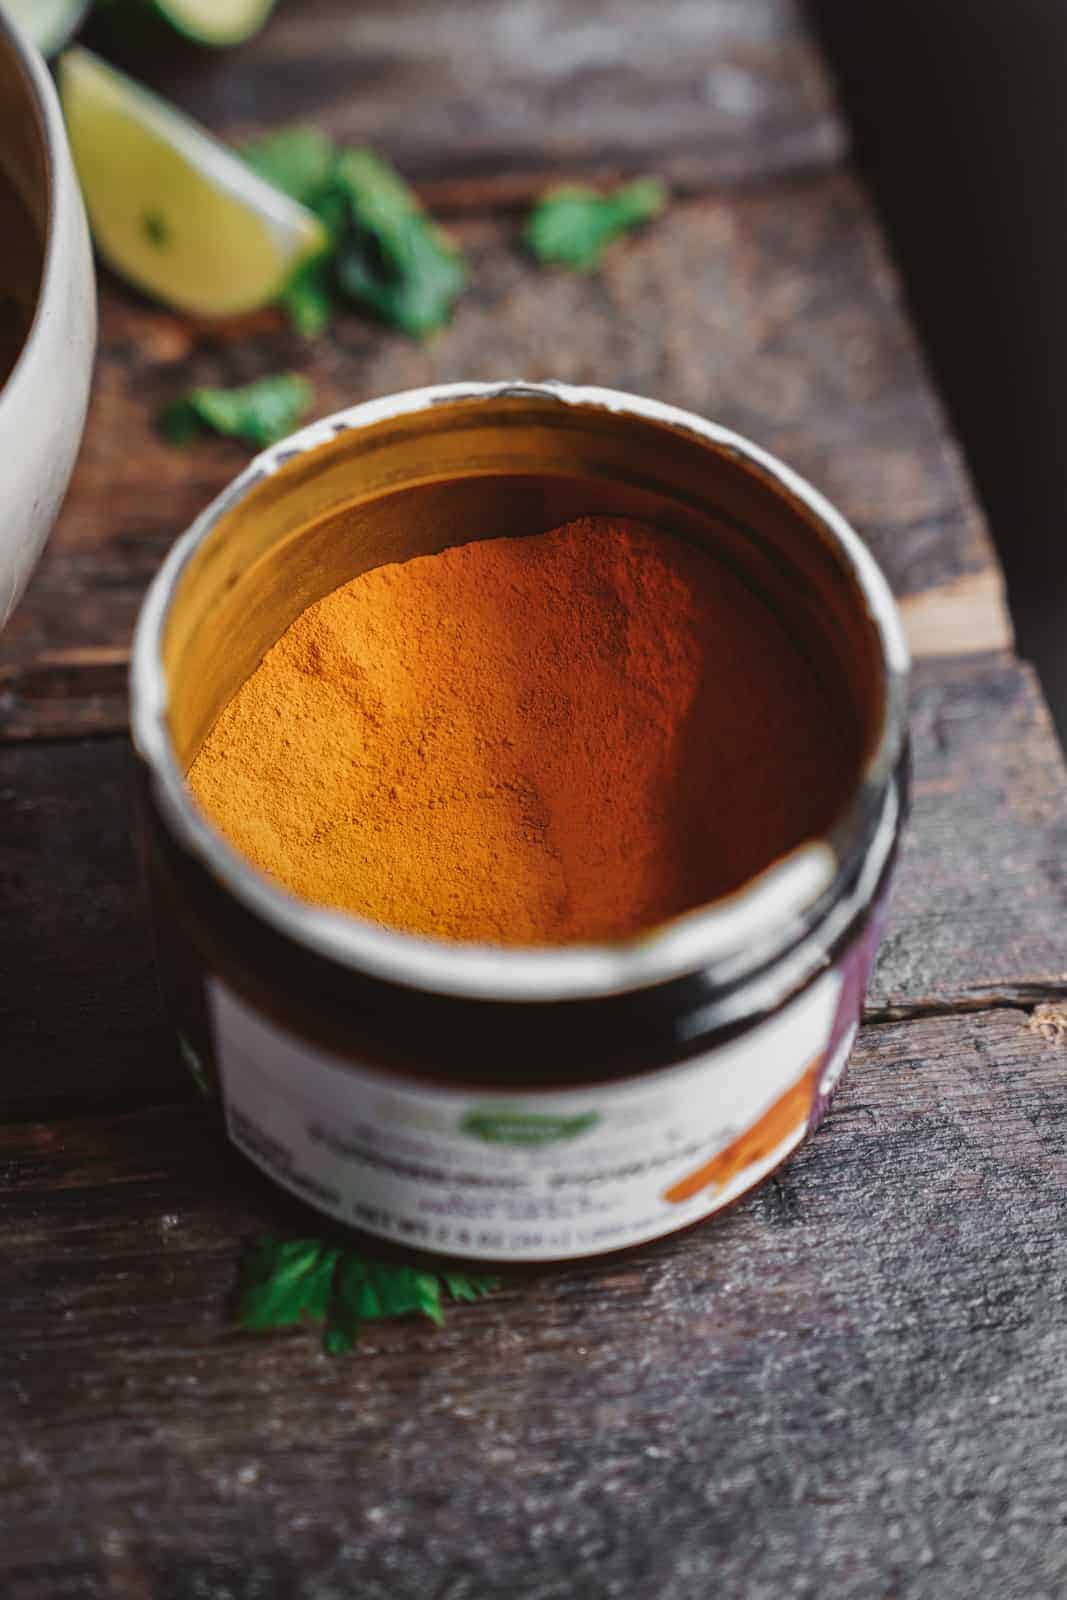 Up close of the Nature's Way Turmeric Powder in container.